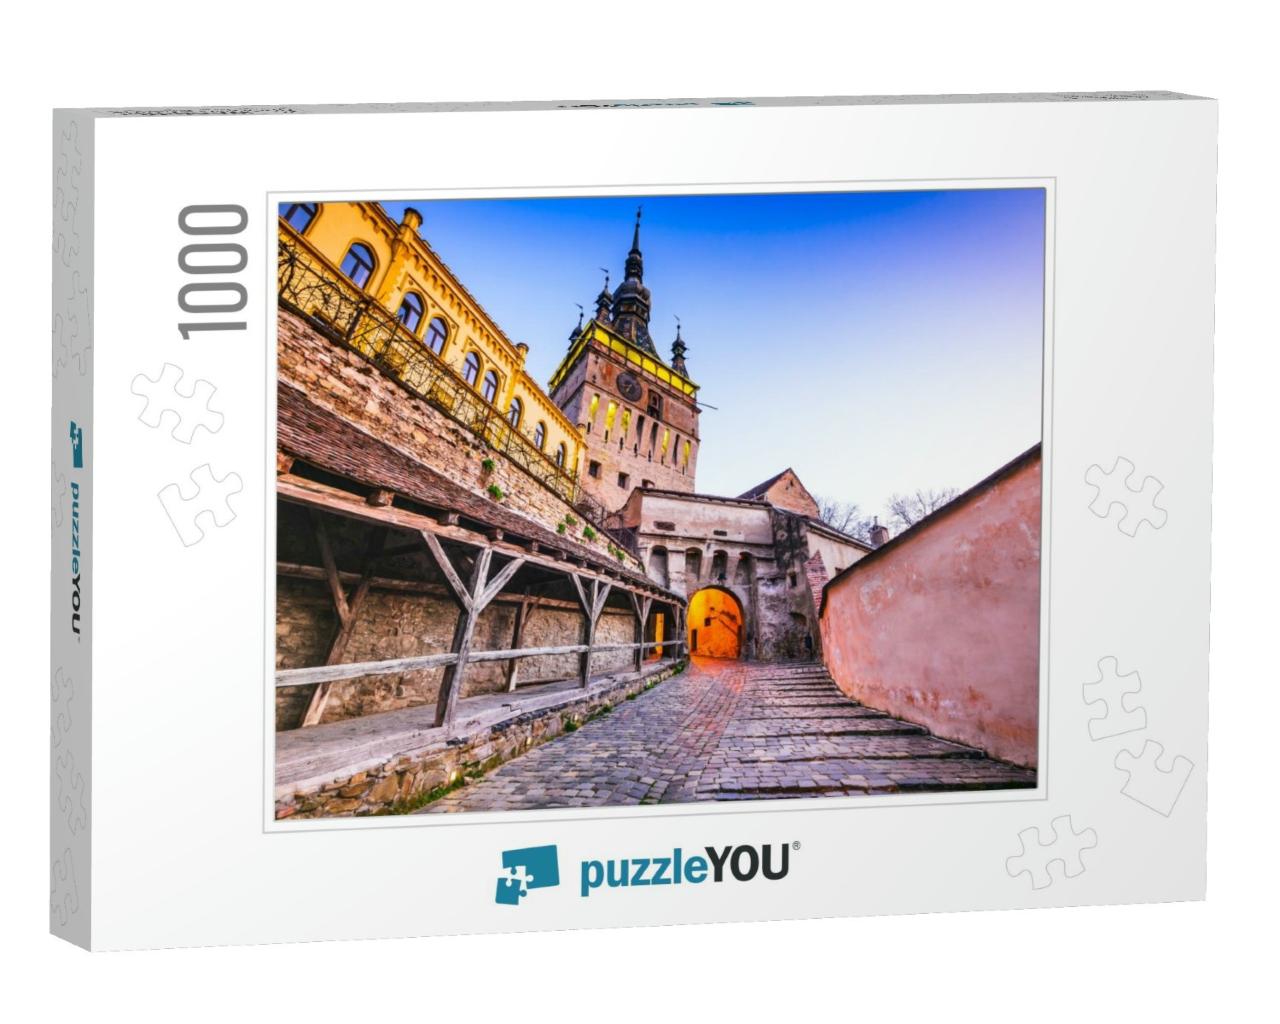 Sighisoara, Transylvania, Romania with Famous Medieval Fo... Jigsaw Puzzle with 1000 pieces